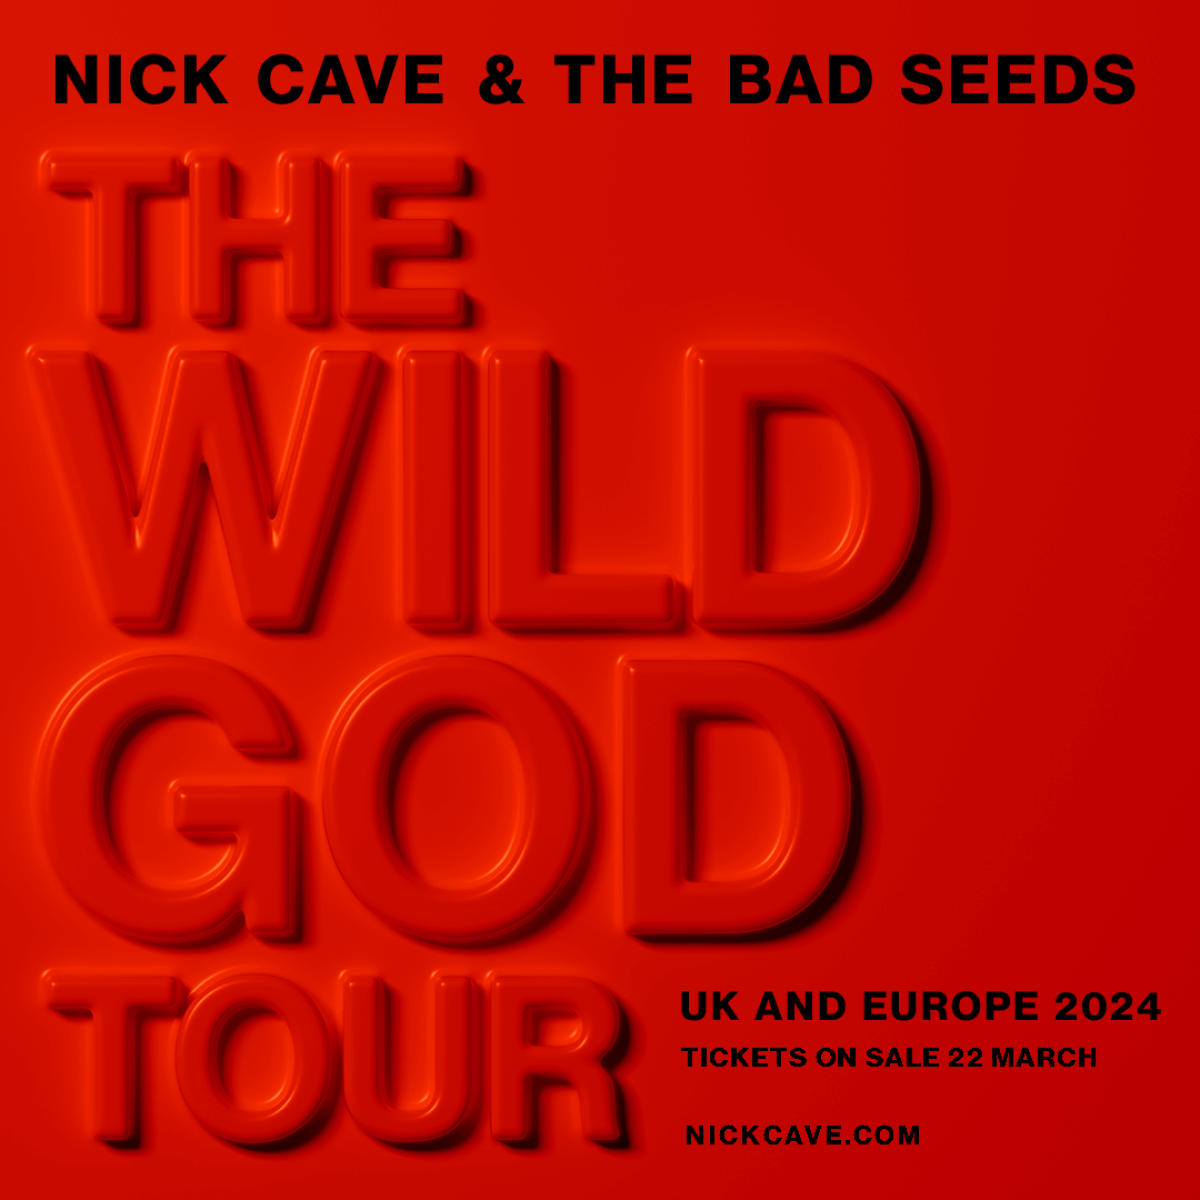 Nick Cave and the Bad Seeds - The Wild God Tour at Rudolf Weber-Arena Tickets